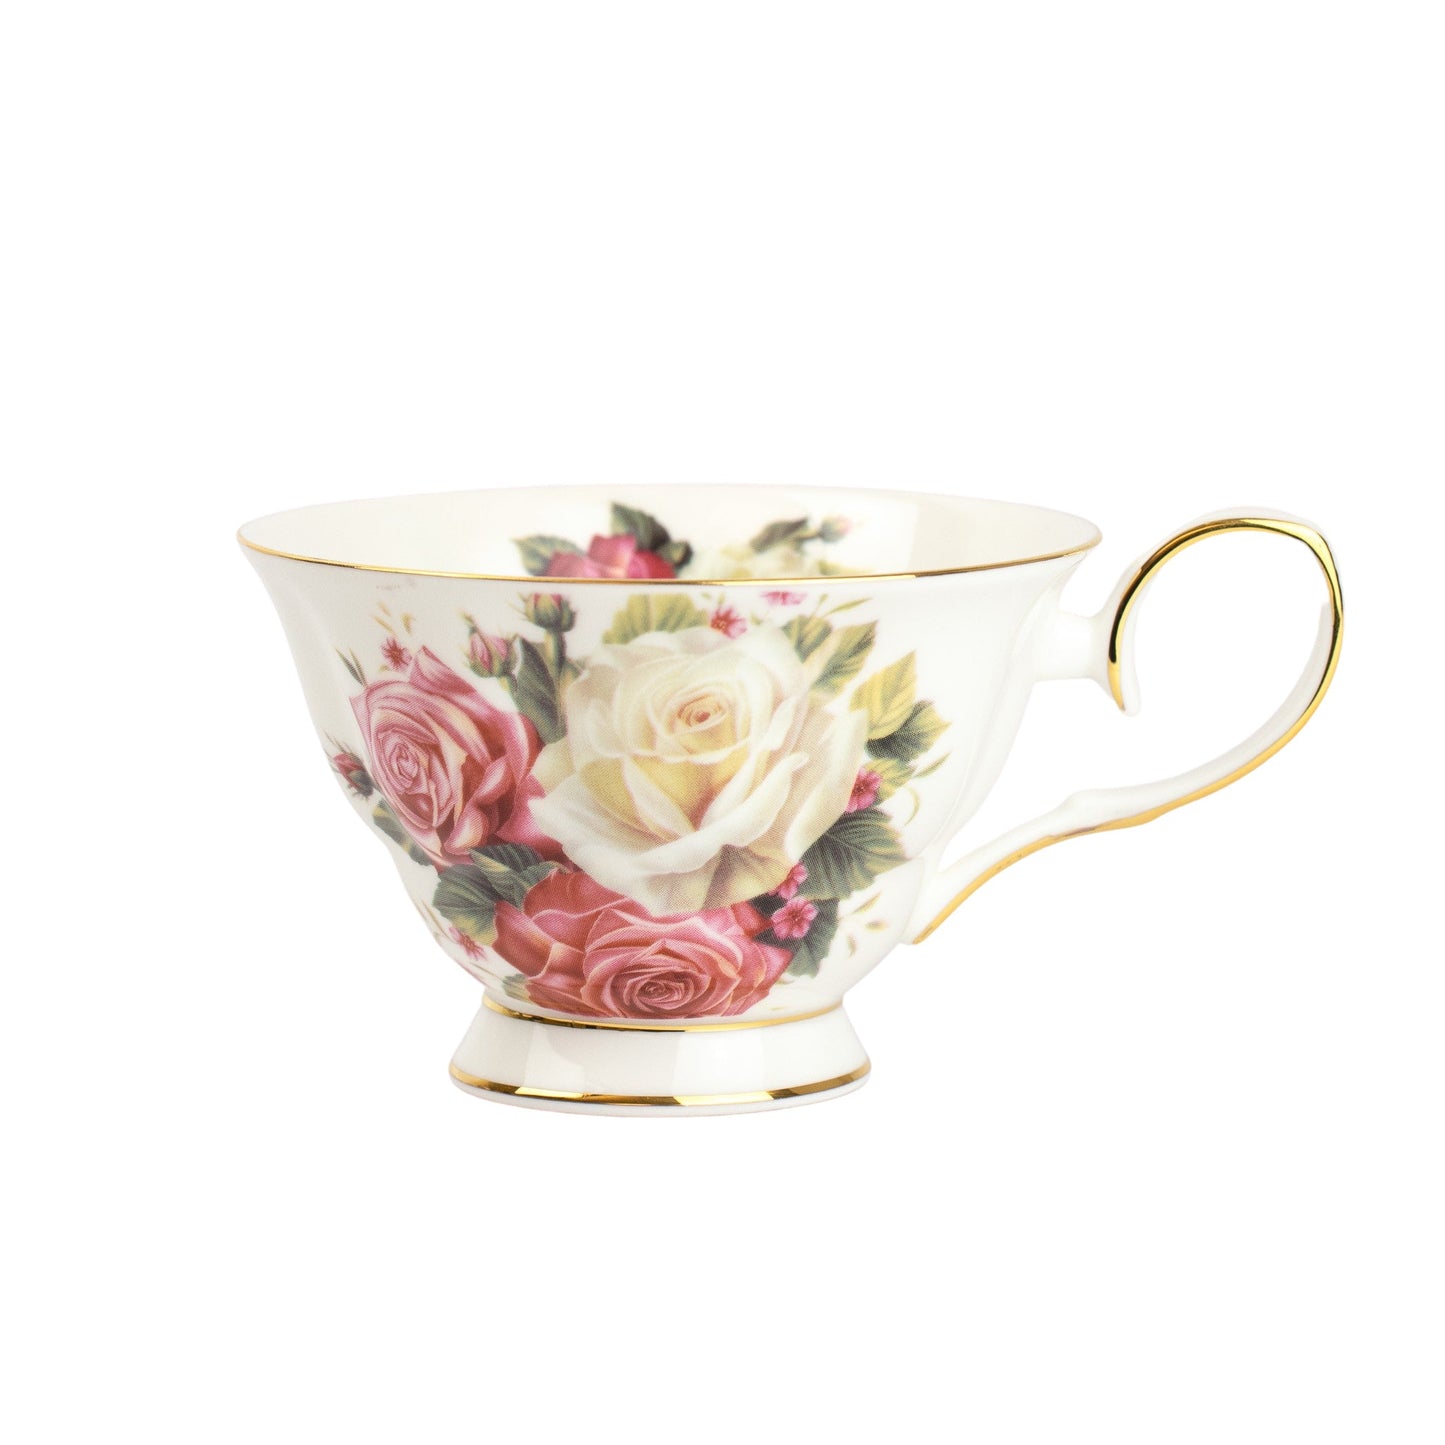 Cabbage Roses Vintage Style Teacup and Saucer